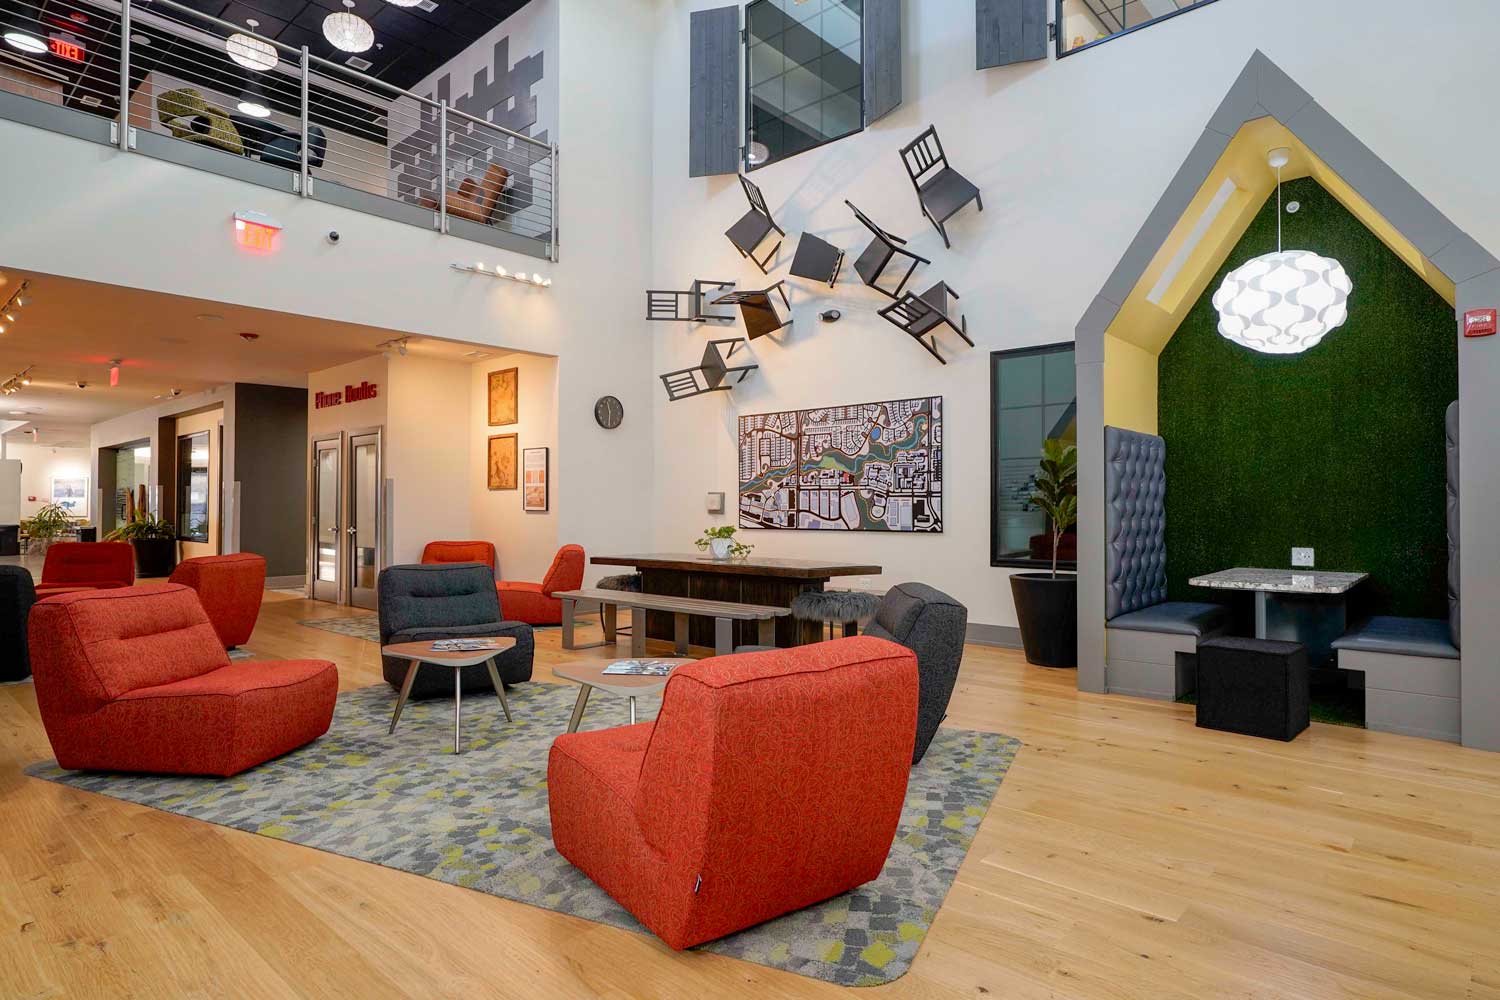 Caddo Office Reimagined coworking space